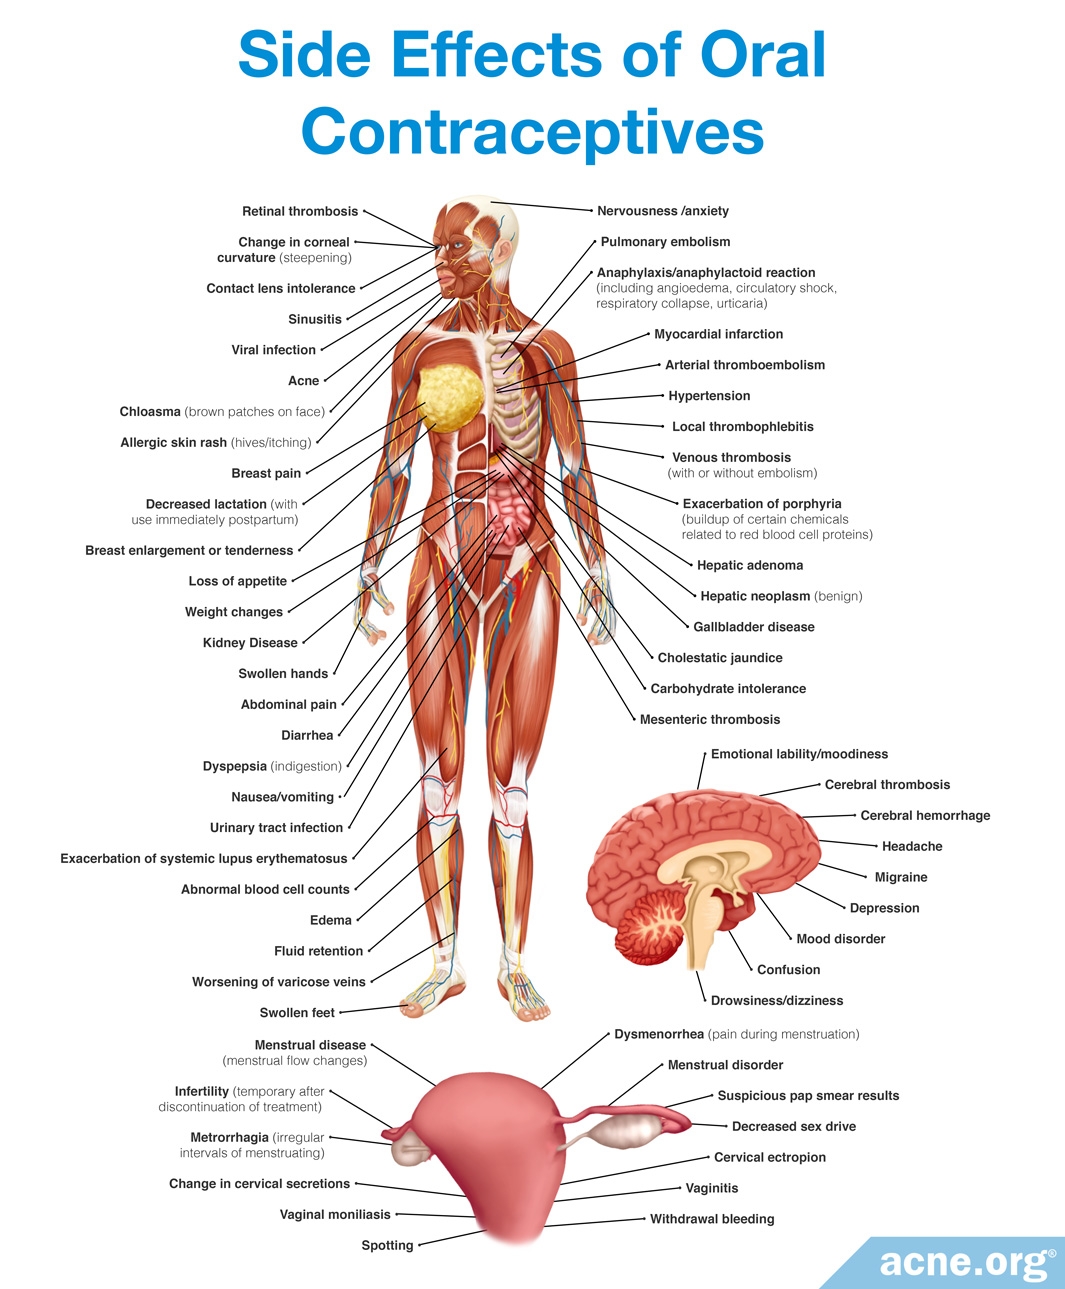 Side Effects of Oral Contraceptives